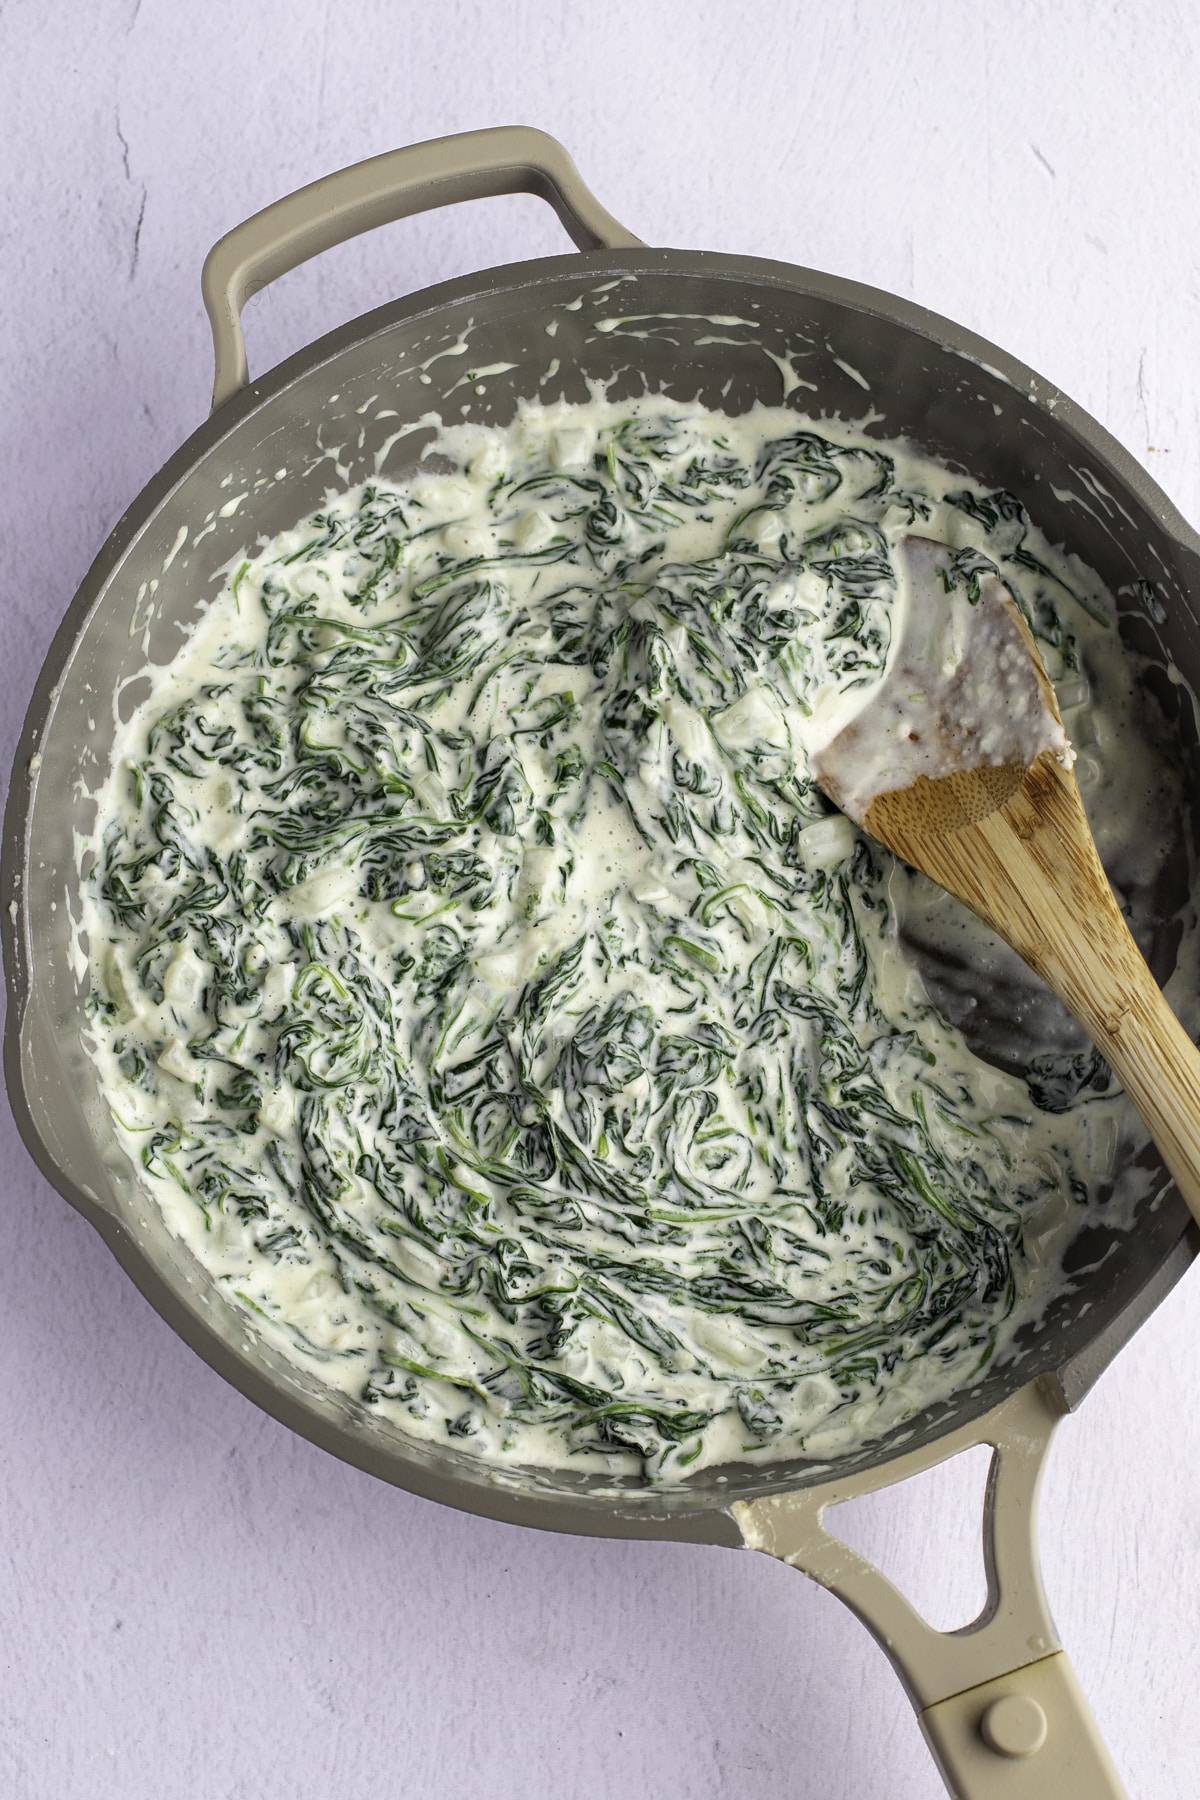 Stirring the spinach and parmesan into the cream.